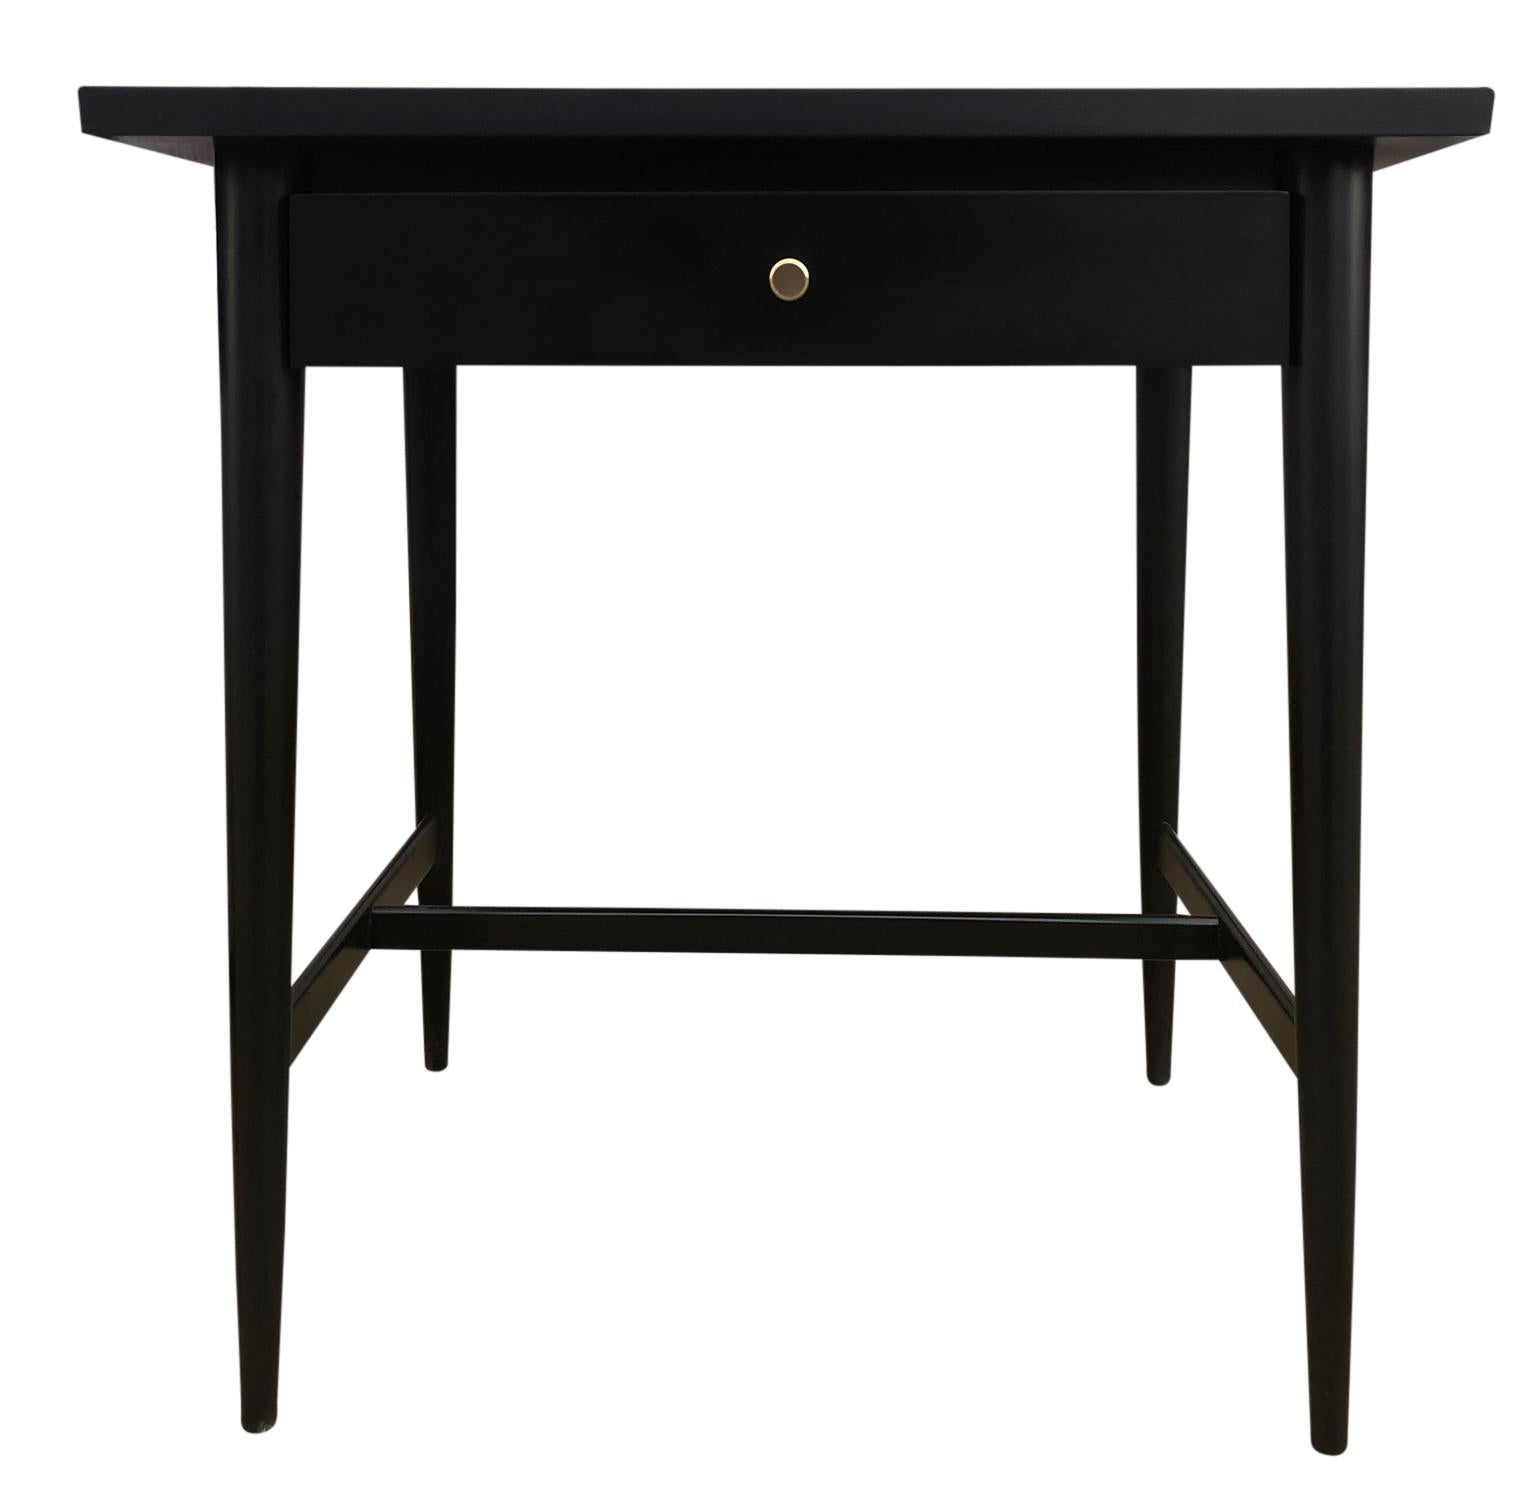 20th Century Midcentury Paul McCobb #1586 Nightstands Black Lacquer Finish Brass Knobs